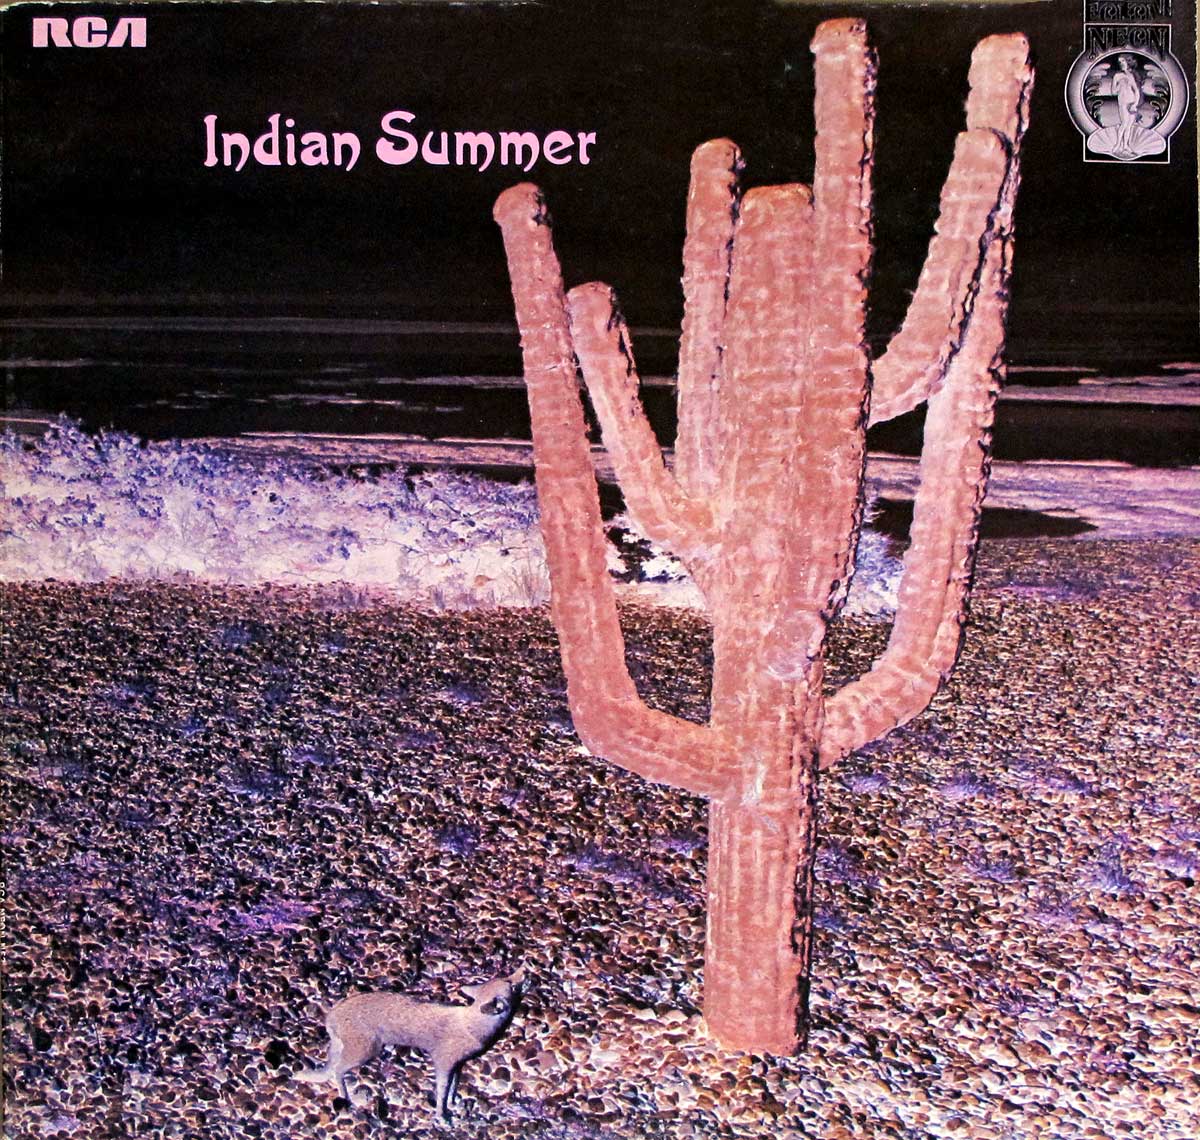 High Quality Photo of Album Front Cover  "INDIAN SUMMER - Self-Titled NEON NE 3"